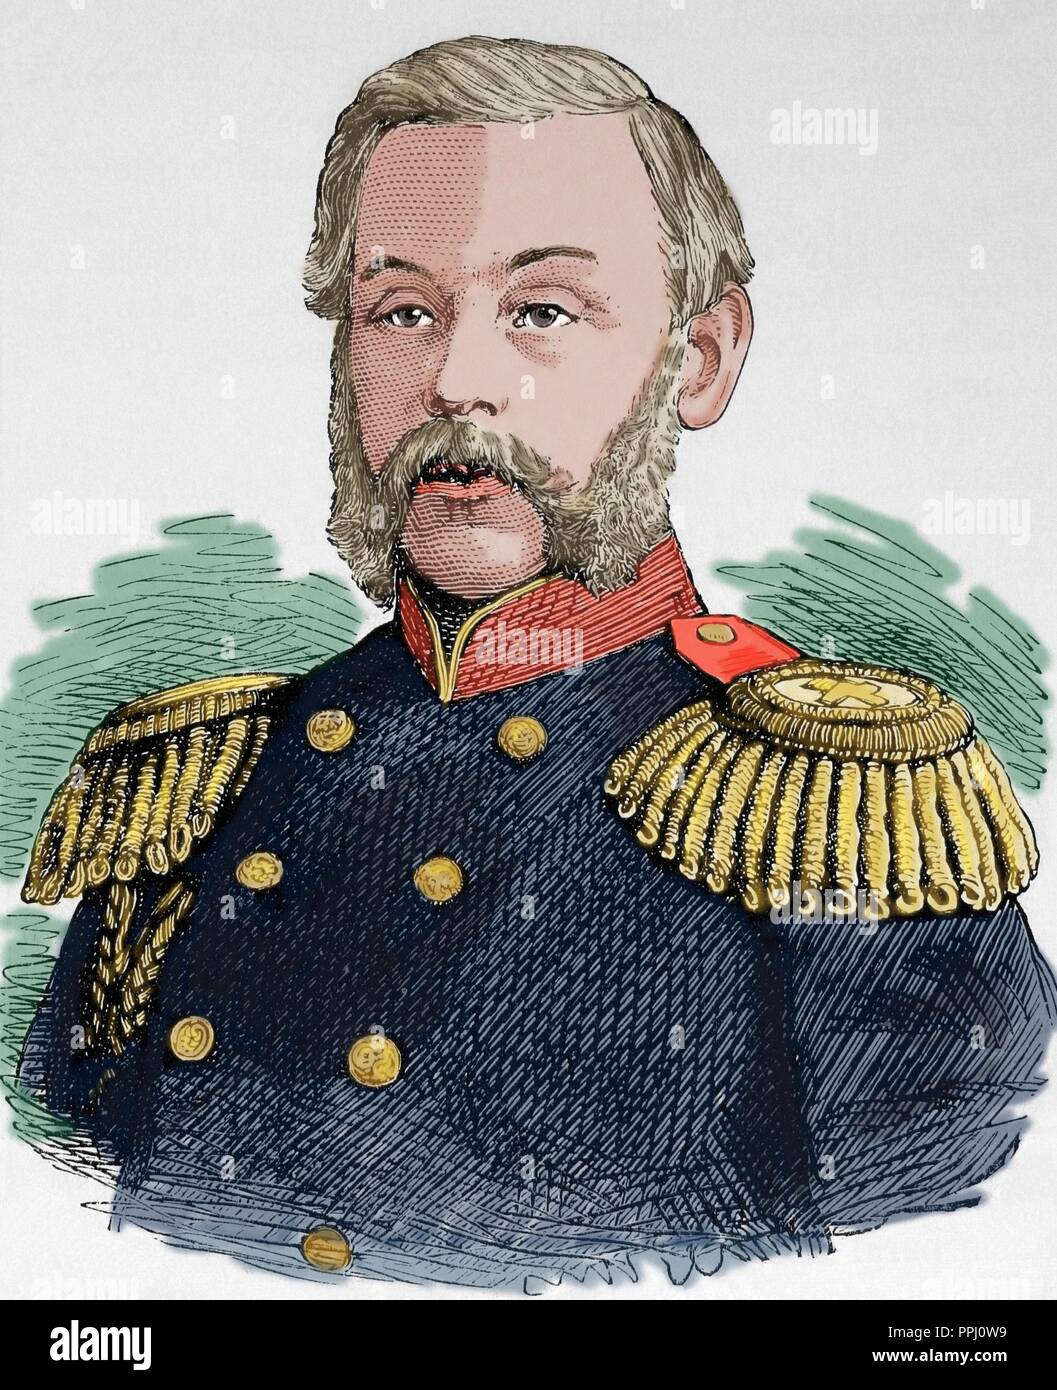 Dmitry Milyutin (1816-1912). Russian Field Marshal and Minister of War. Engraving in Spanish and American Illustration, 1877. Colored. Stock Photo